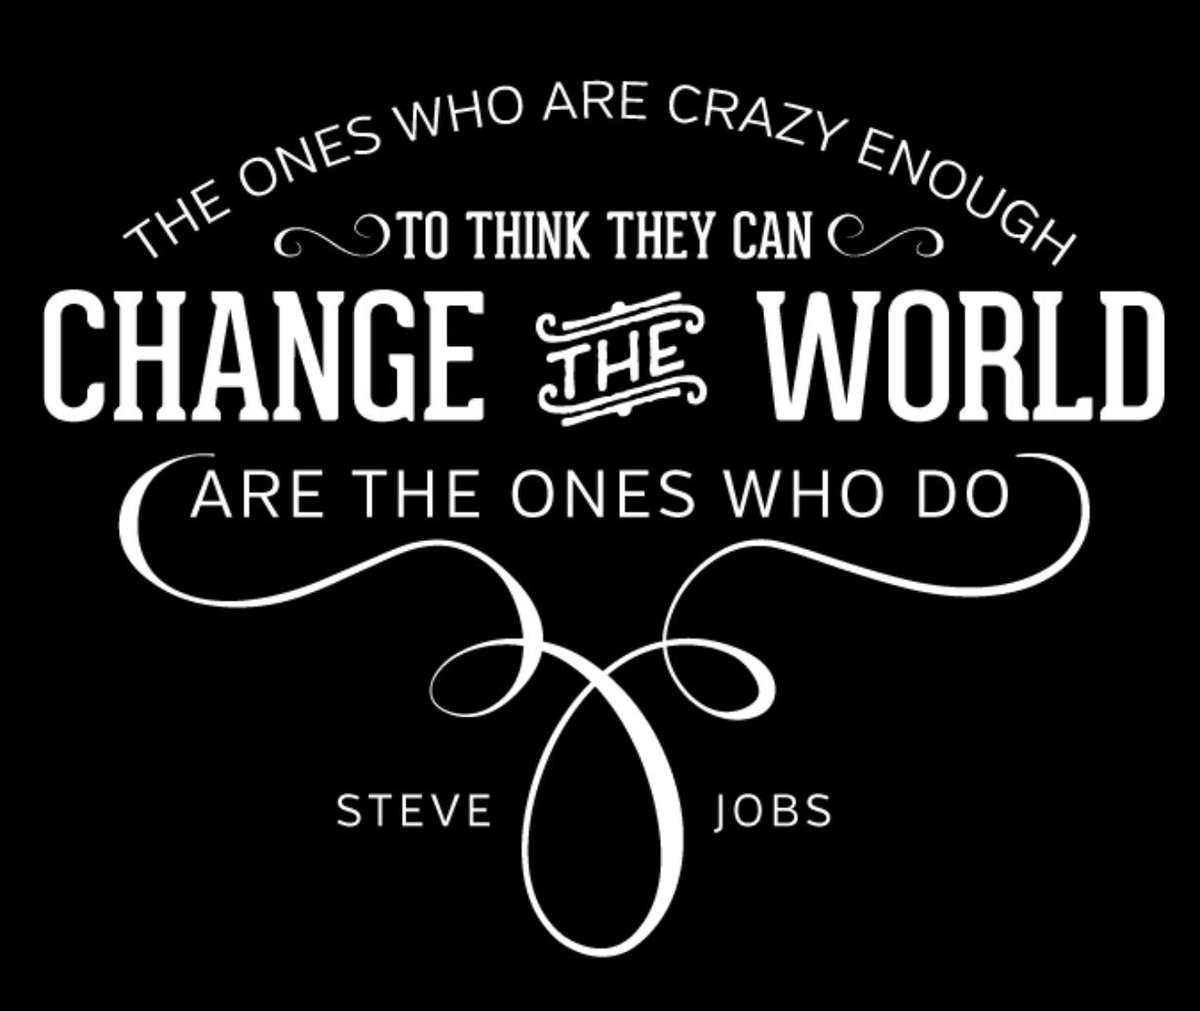 The ones who live 4. Crazy World quotes. The one who. One. Are you Crazy.